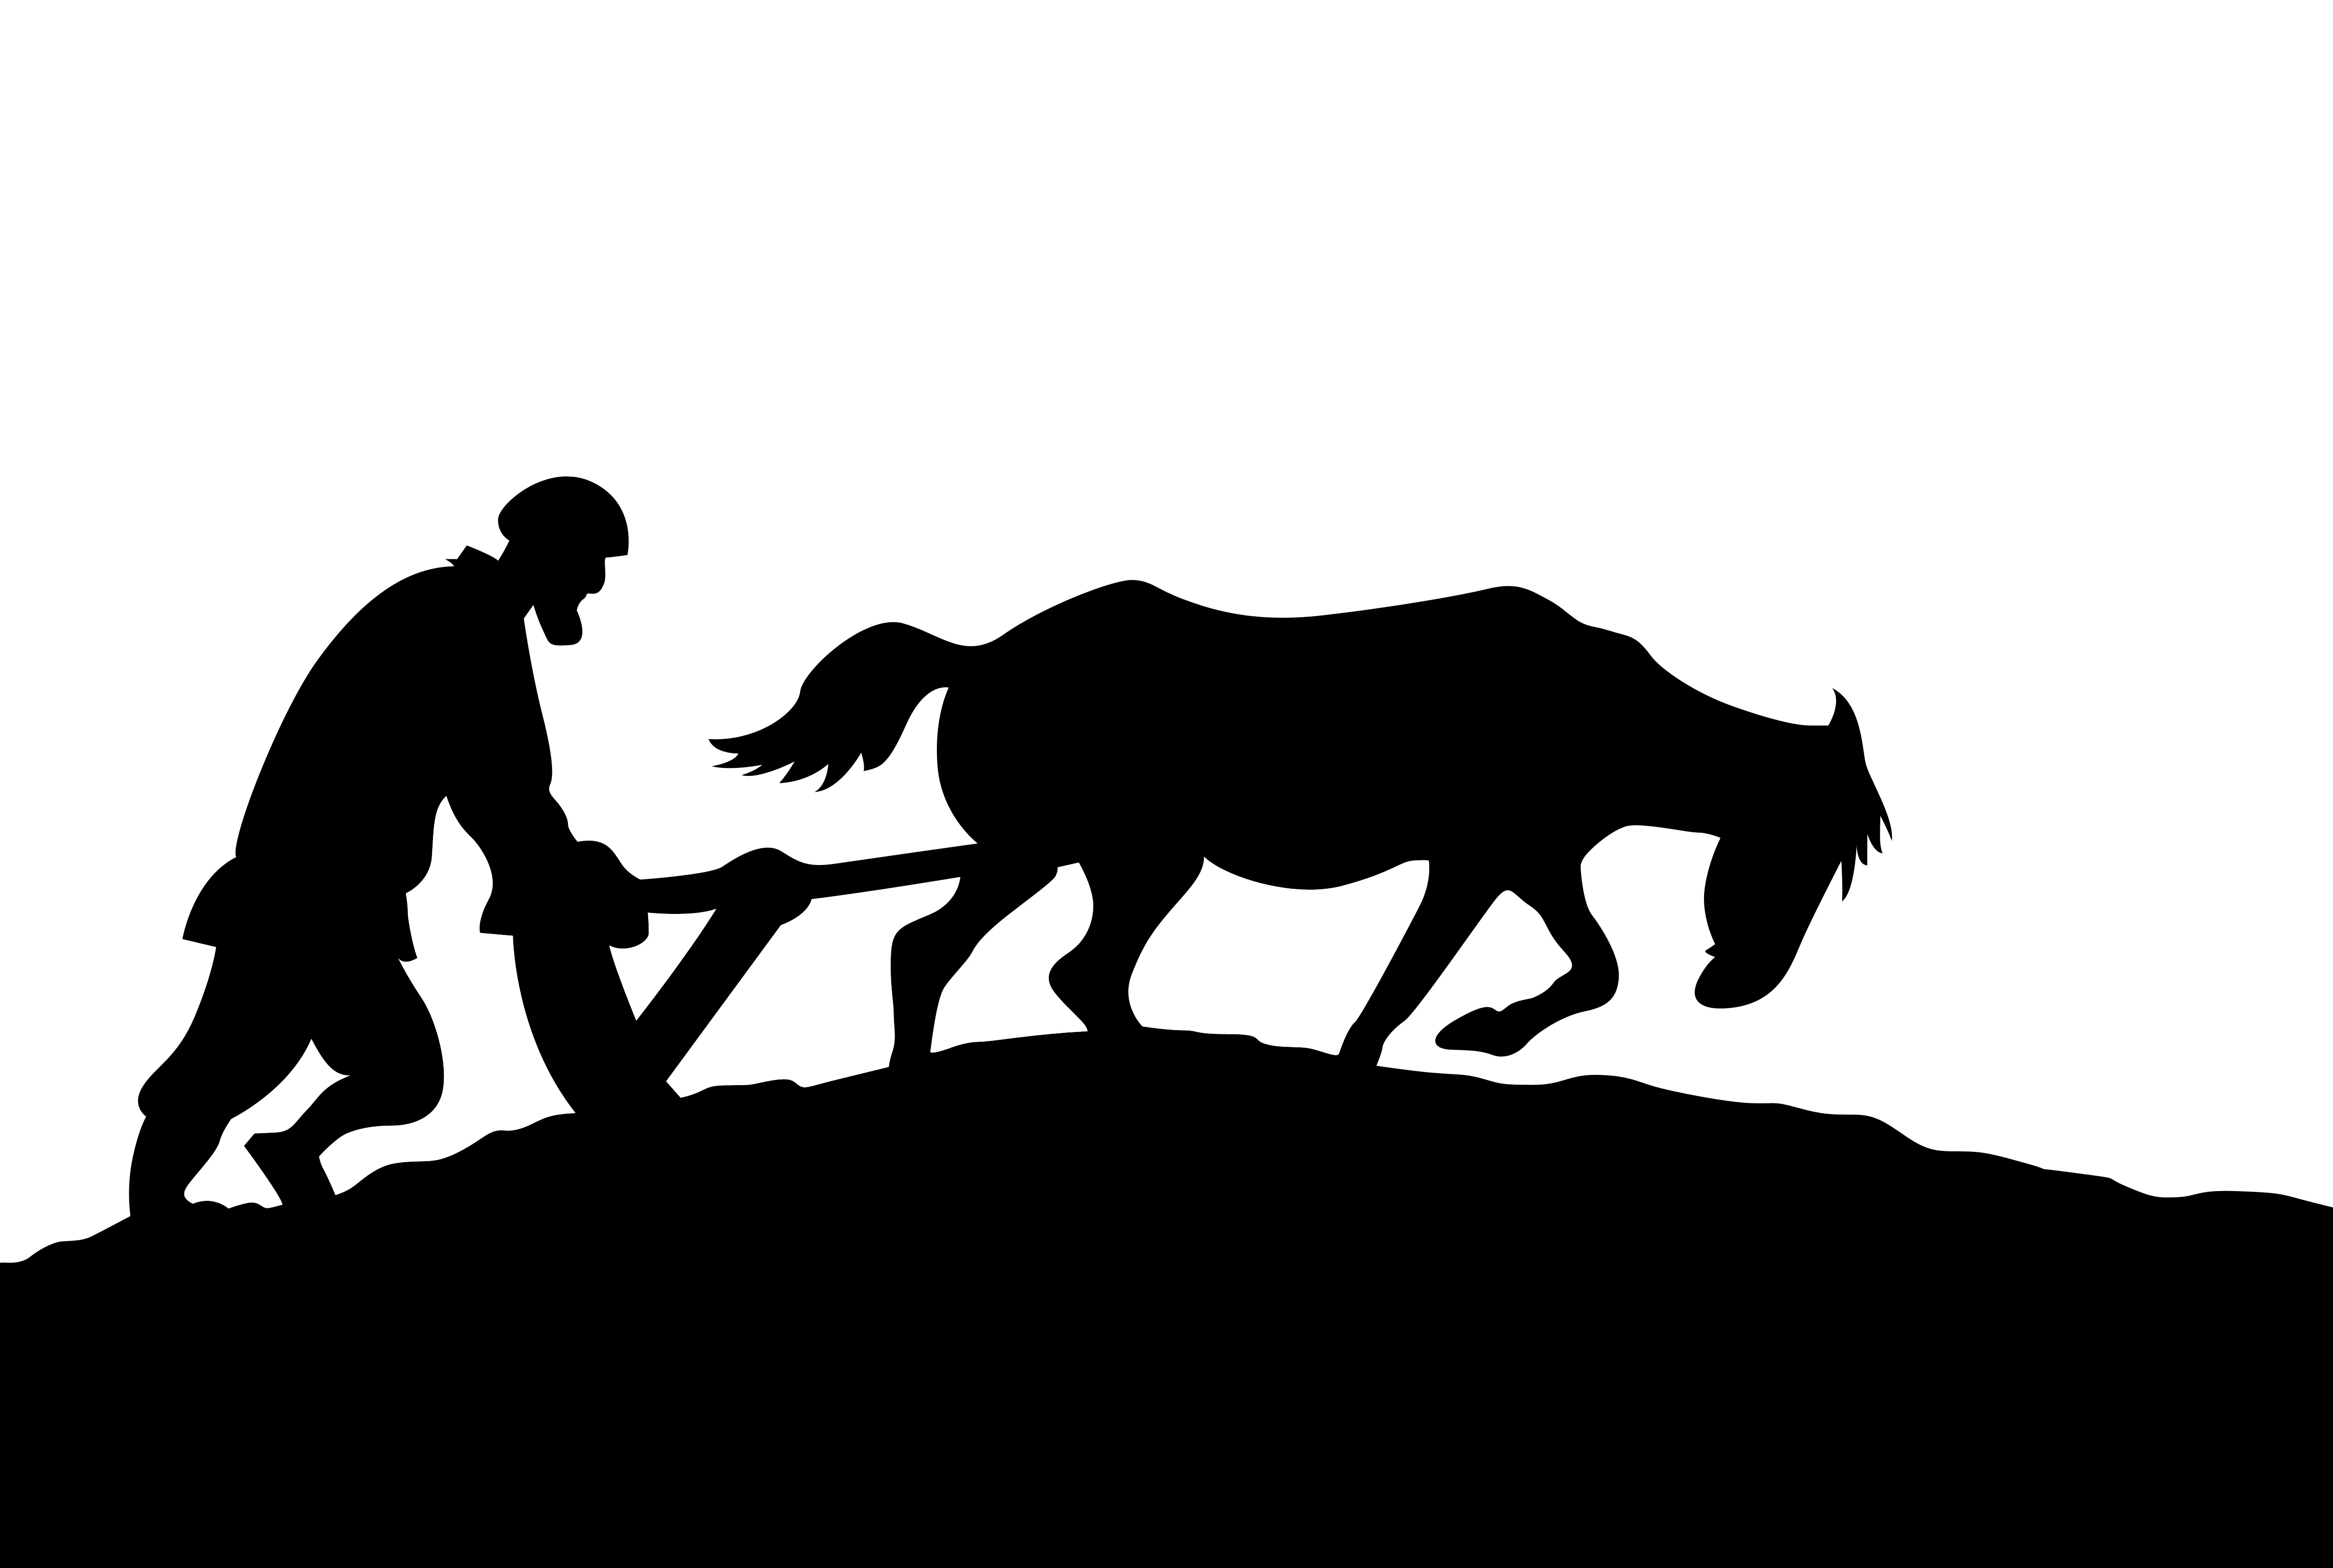 peasant silhouette on white background